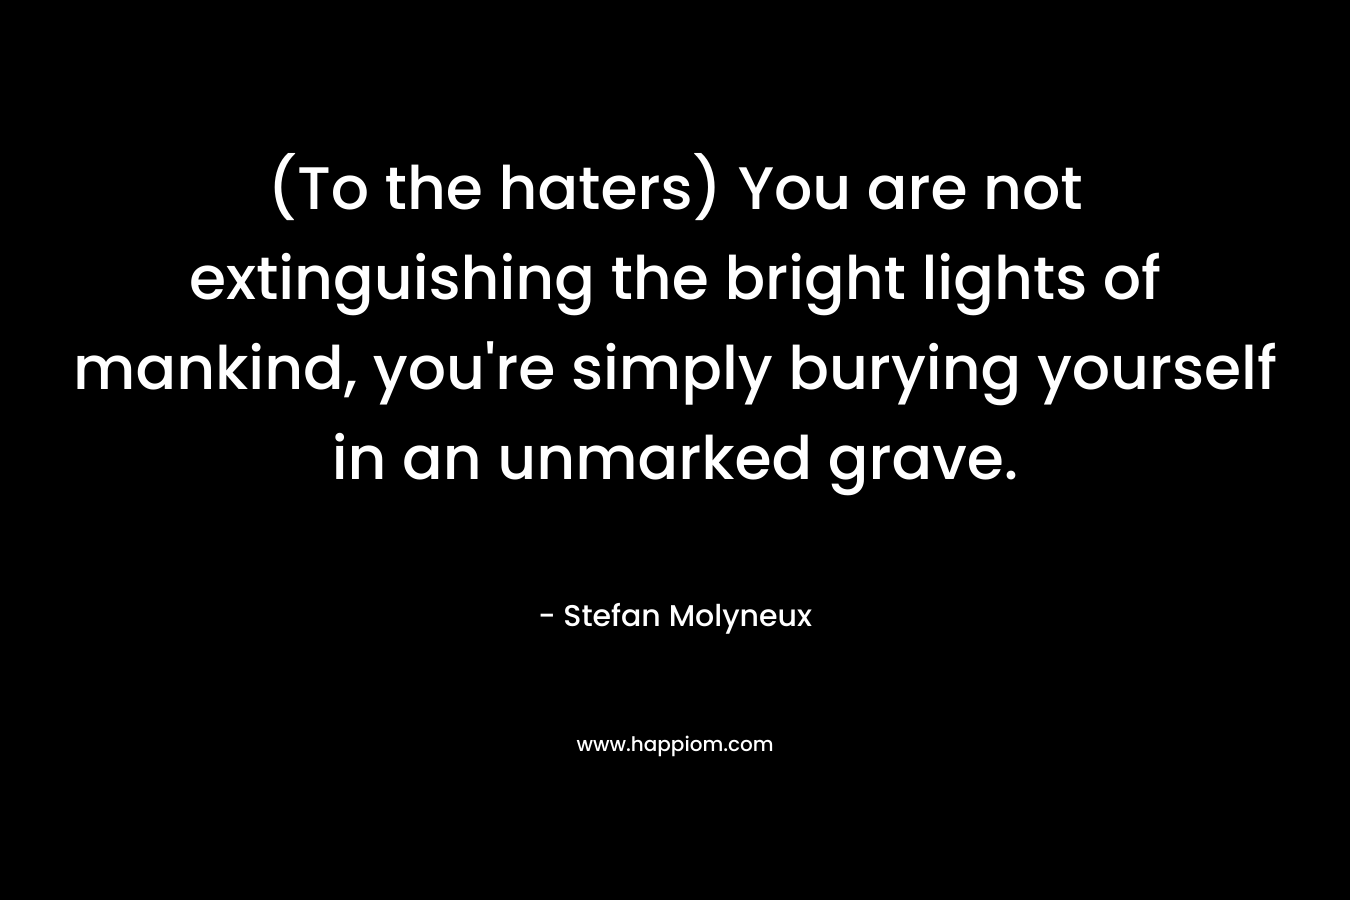 (To the haters) You are not extinguishing the bright lights of mankind, you’re simply burying yourself in an unmarked grave. – Stefan Molyneux